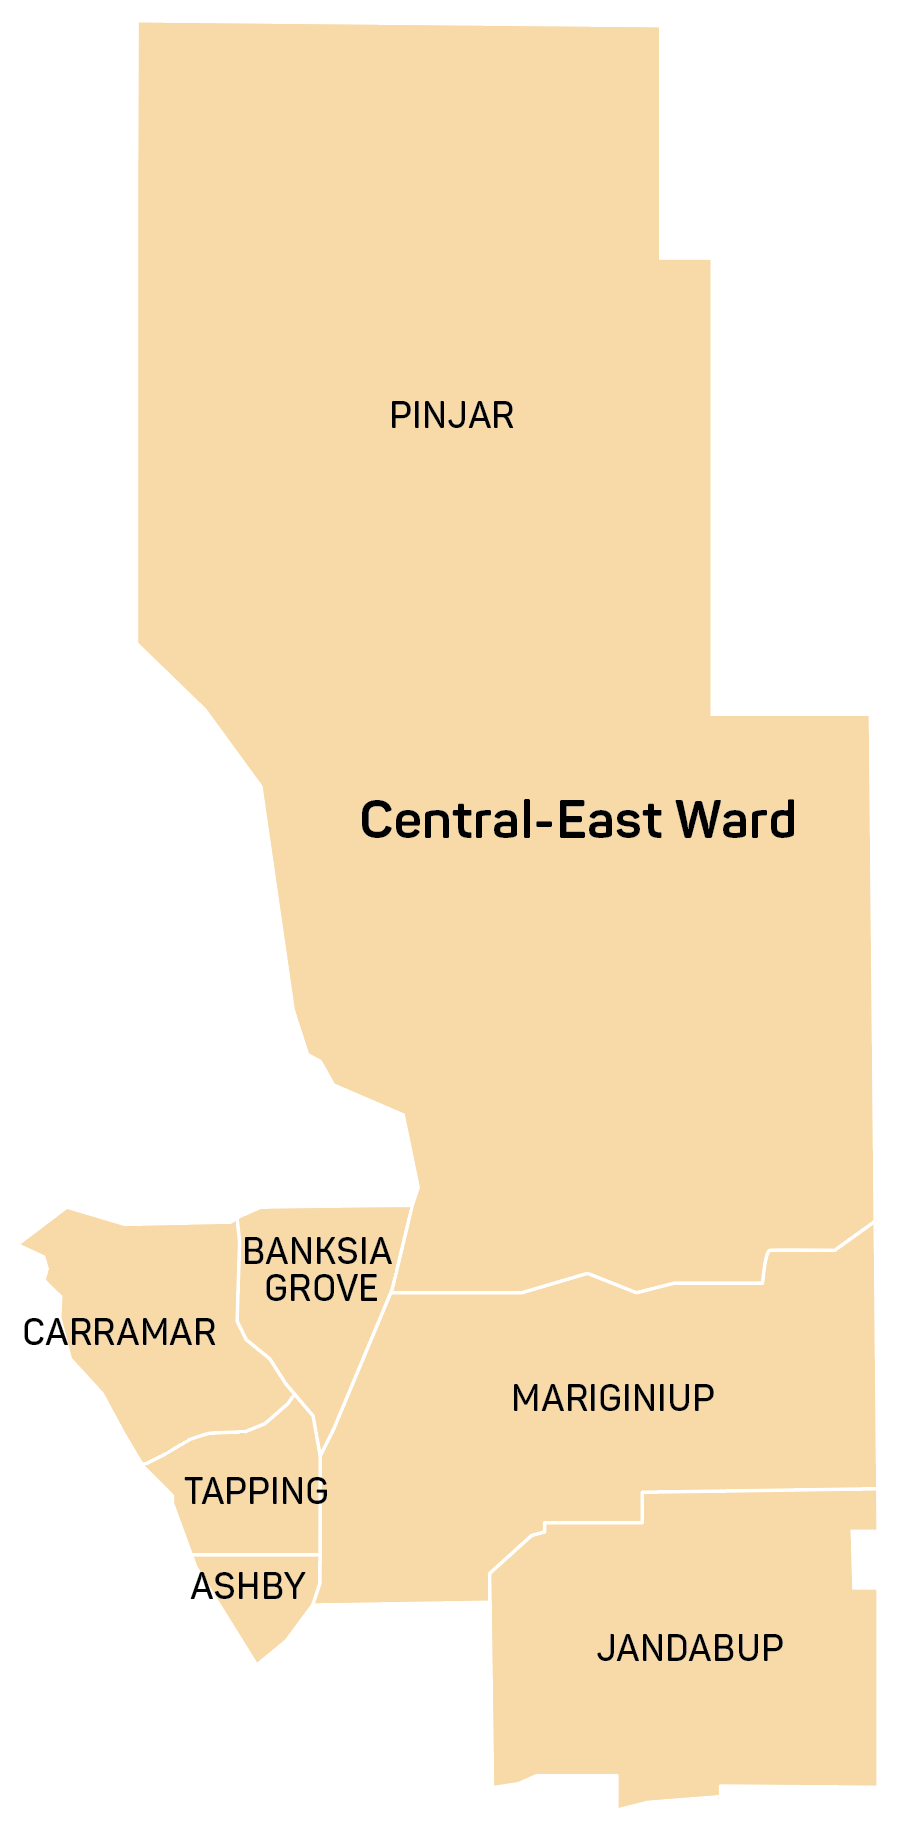 Central-East Ward map and suburbs